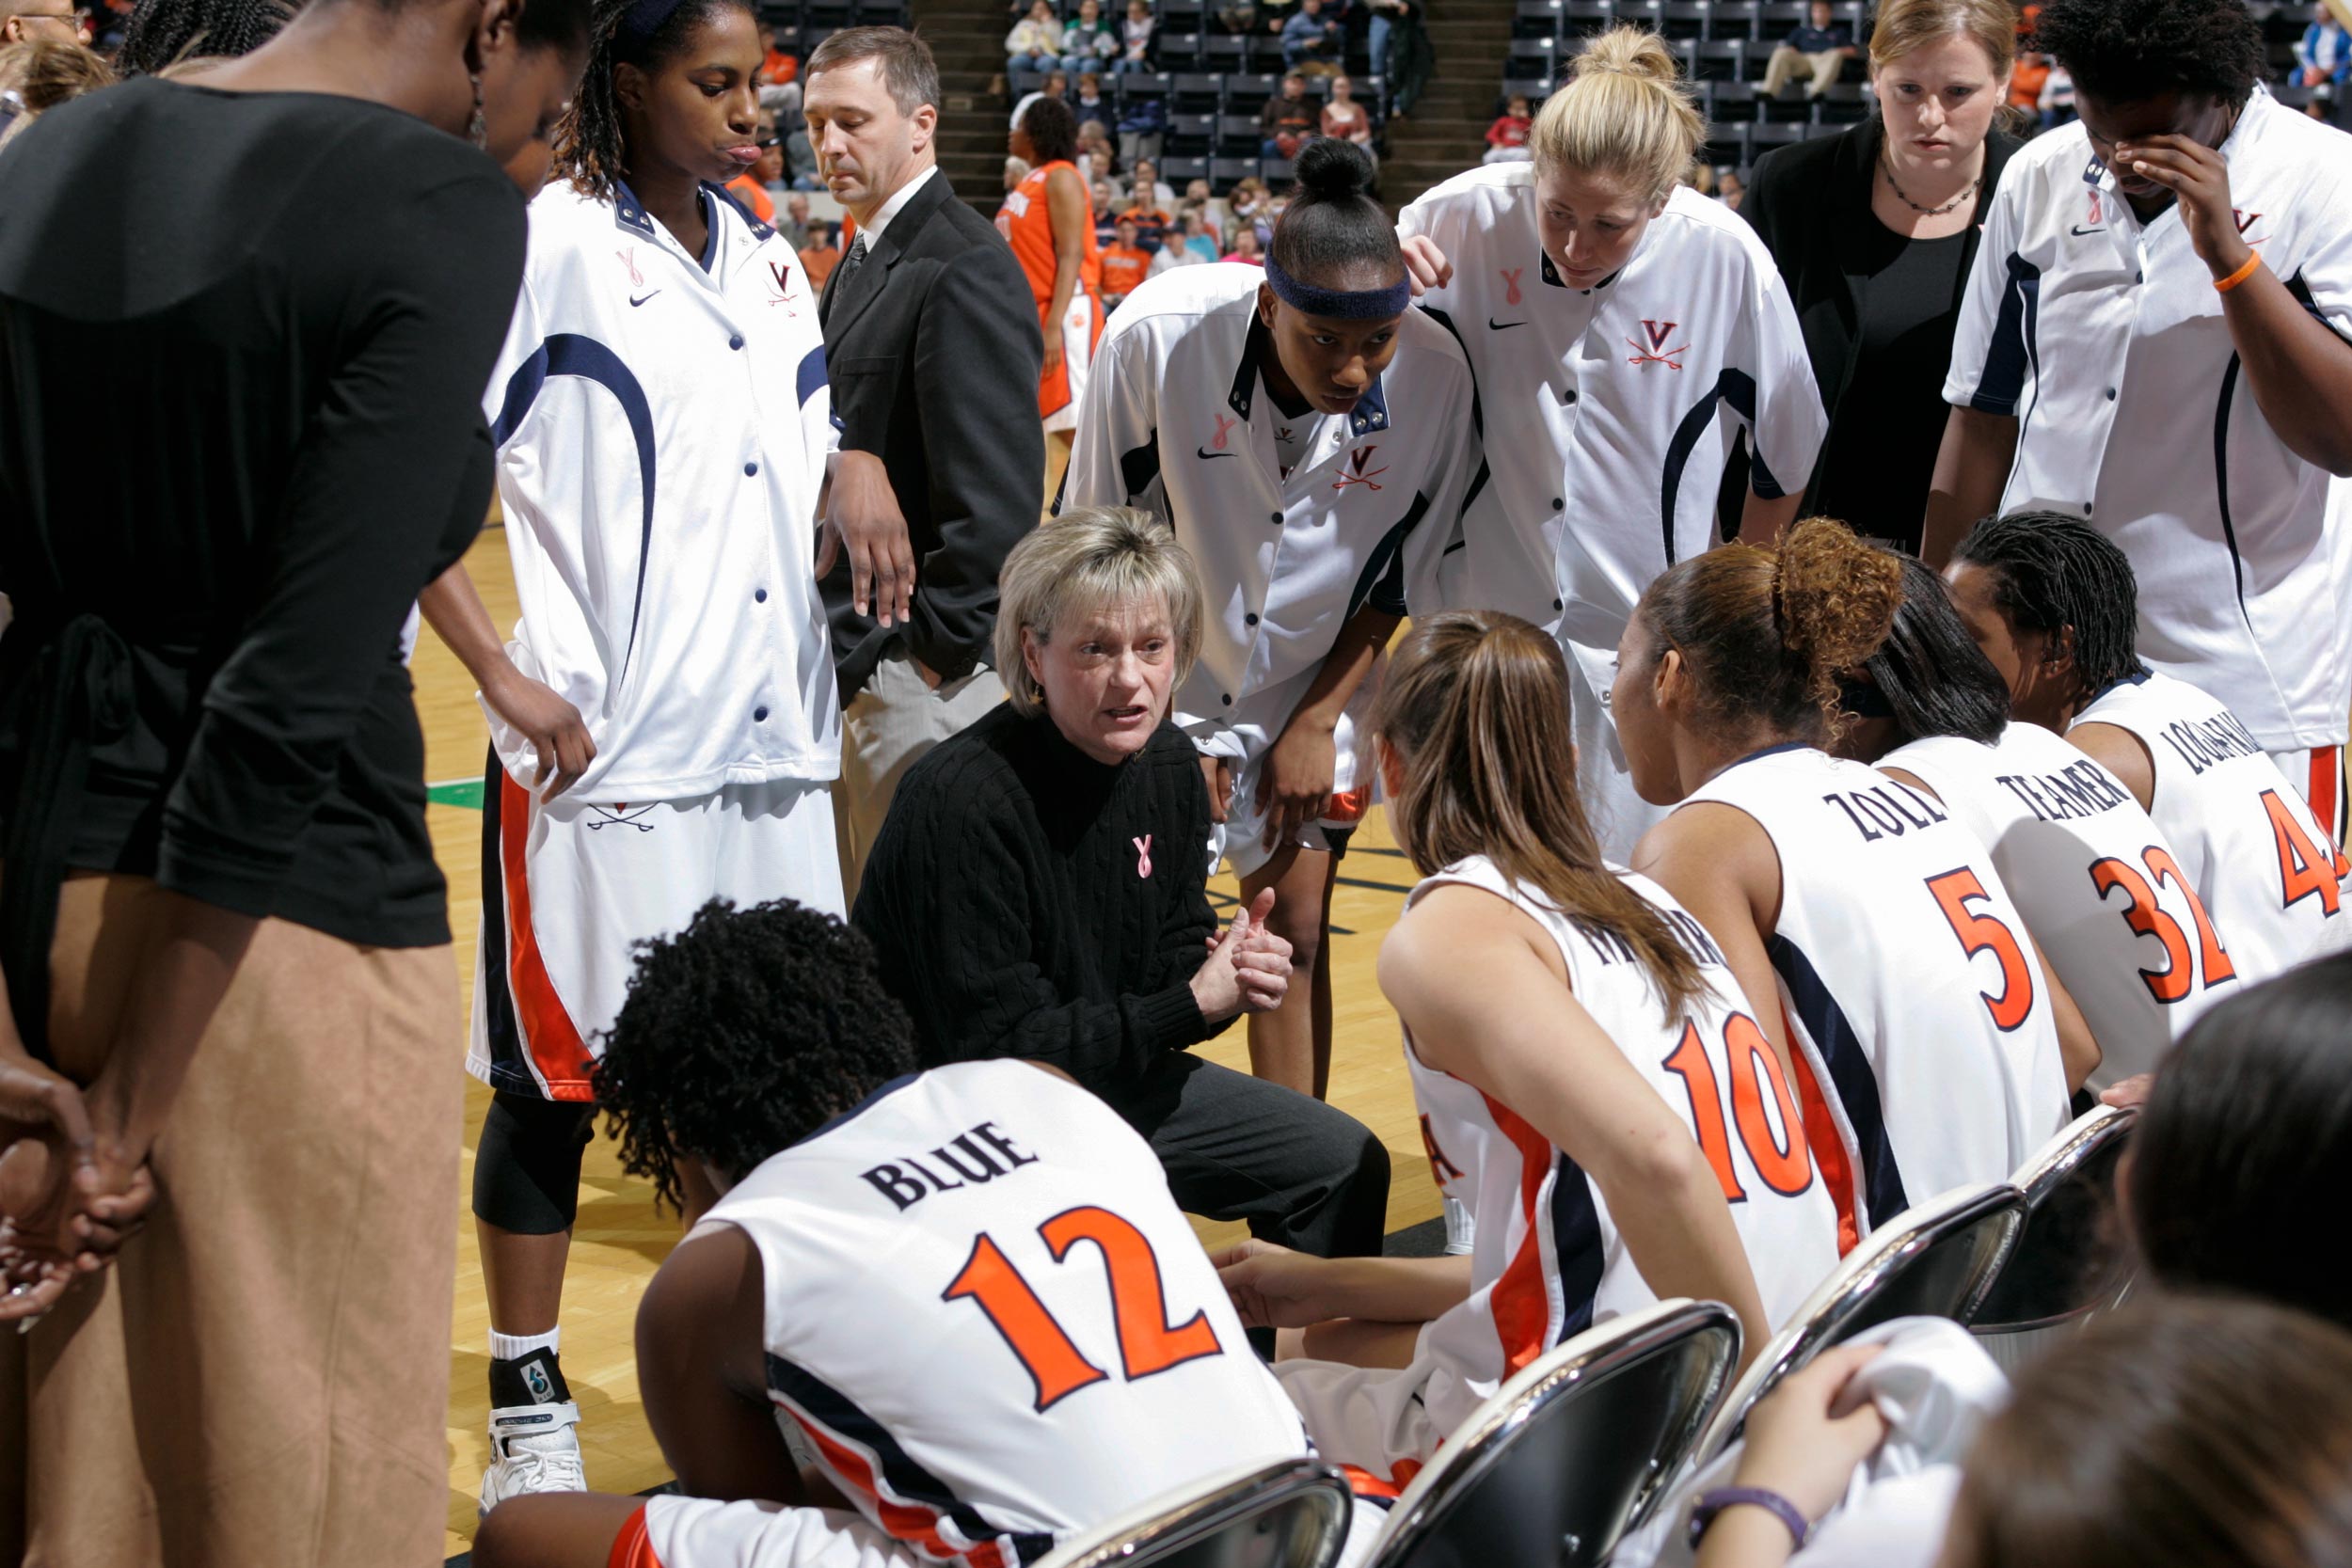 Debbie Ryan sits on the sidelines surrounded by members of the UVA women's basketball team.